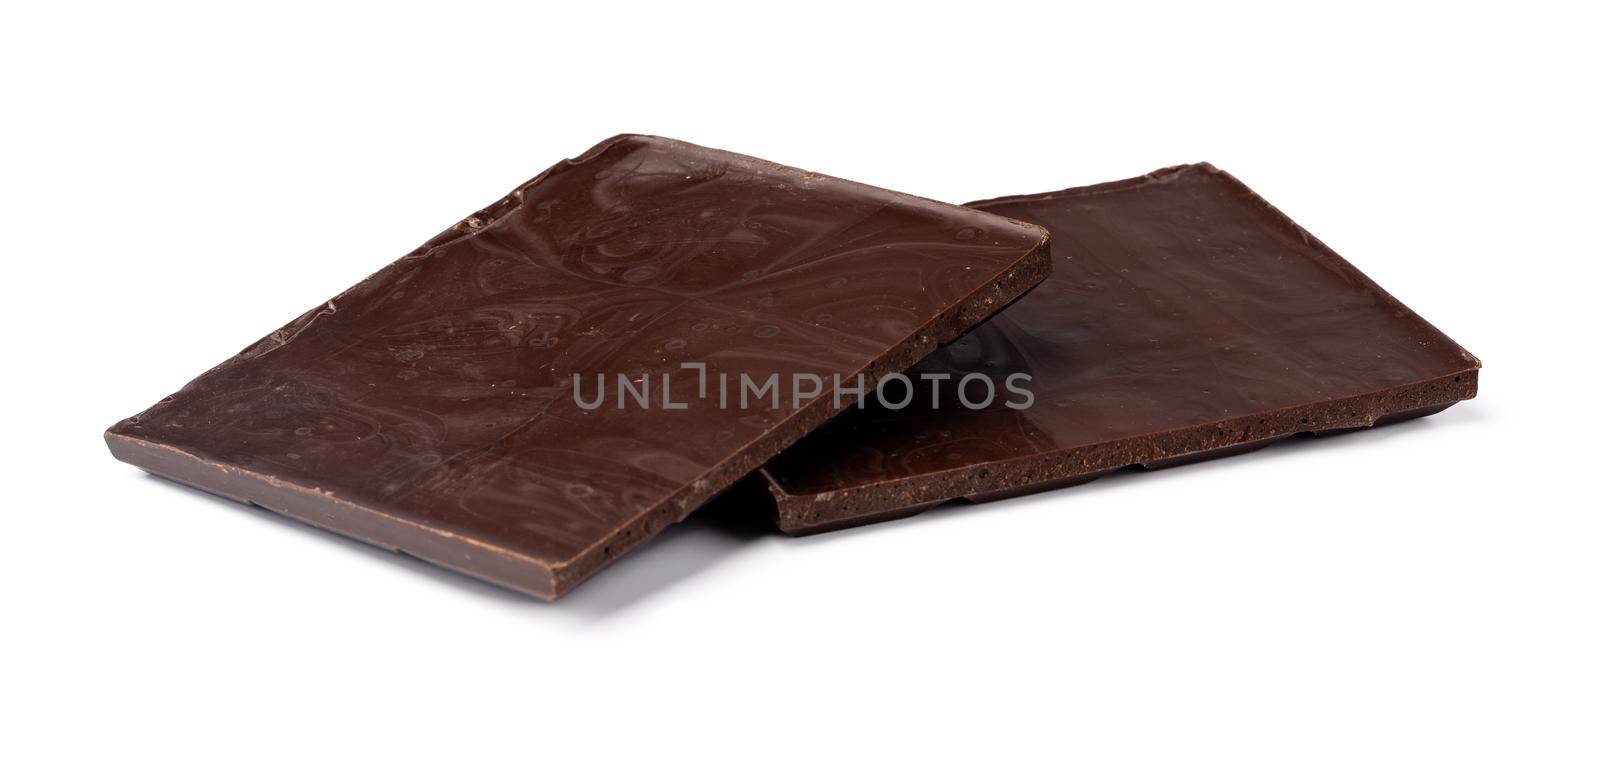 Small dark chocolate pieces isolated on white background by Fabrikasimf